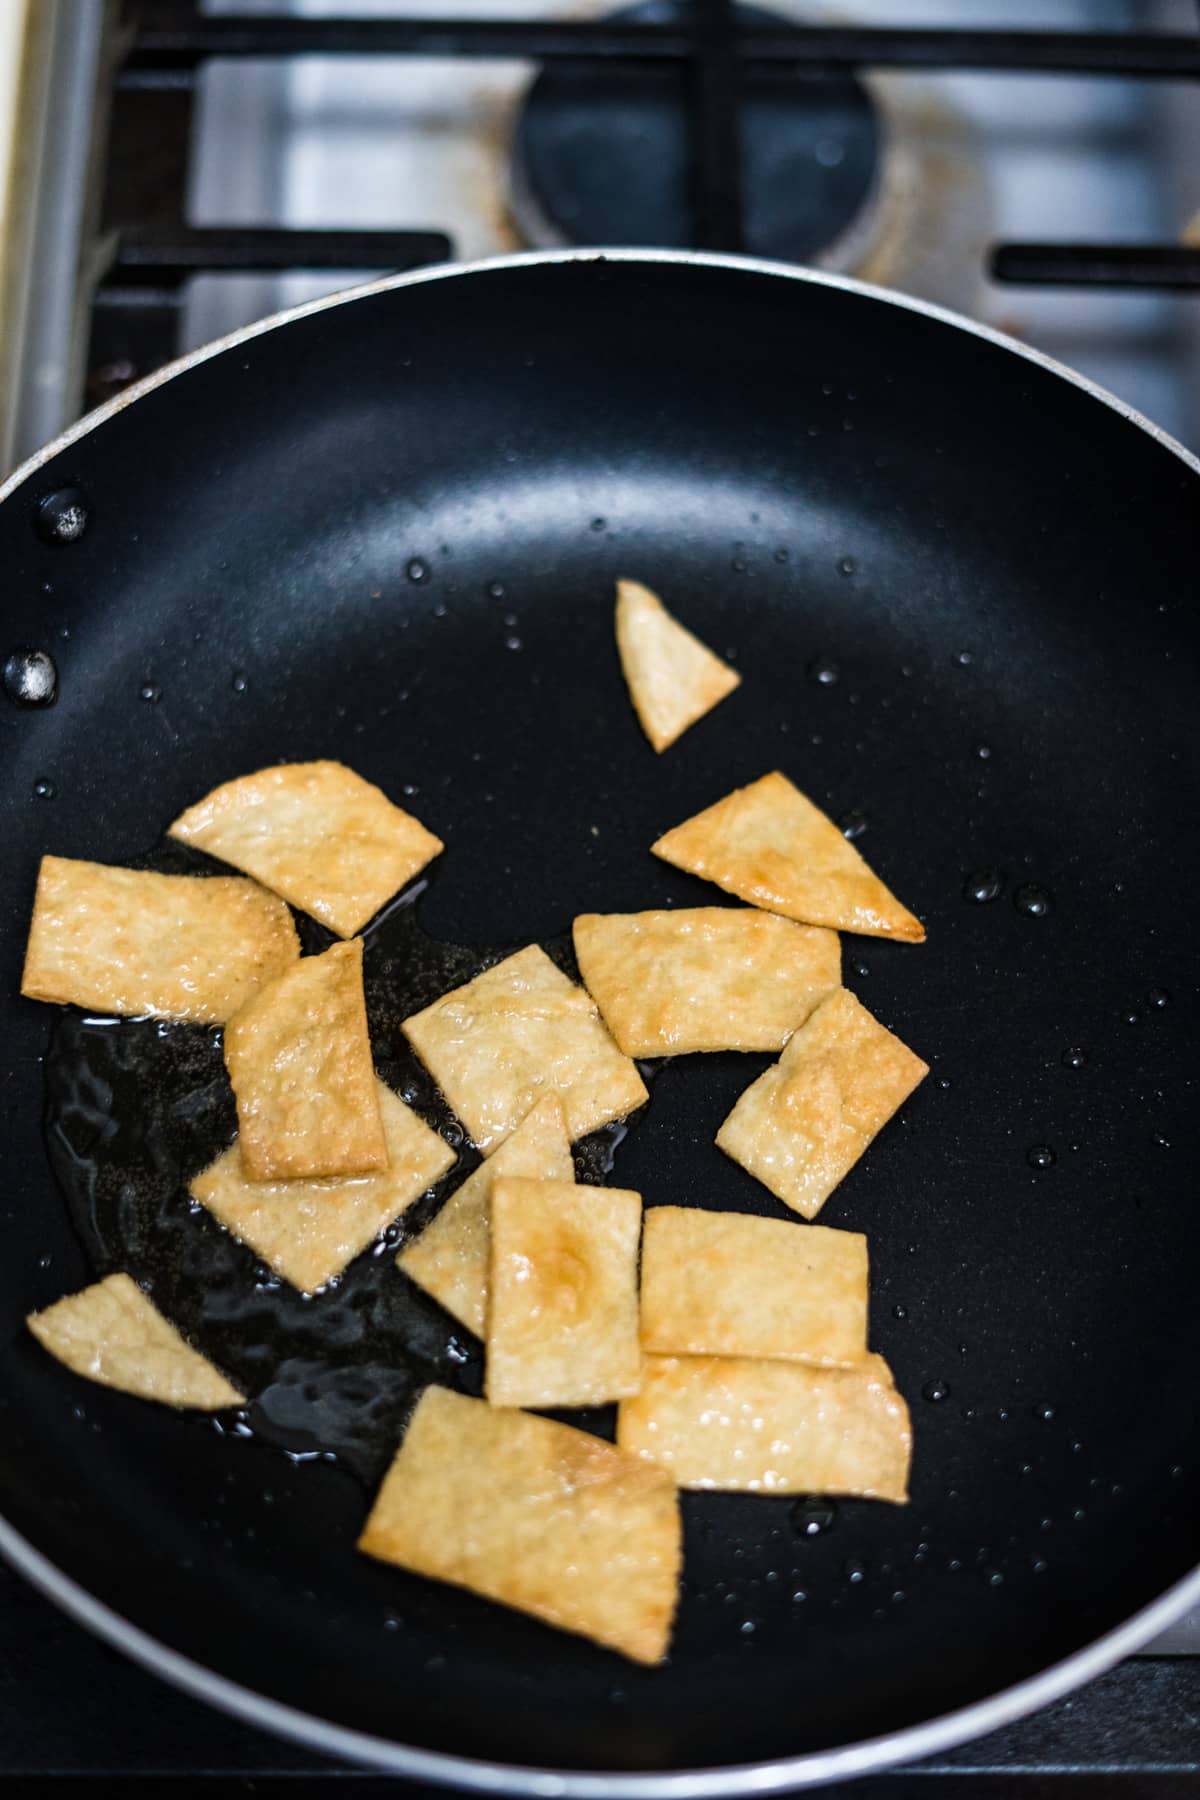 fried flat bread pieces in a pan.